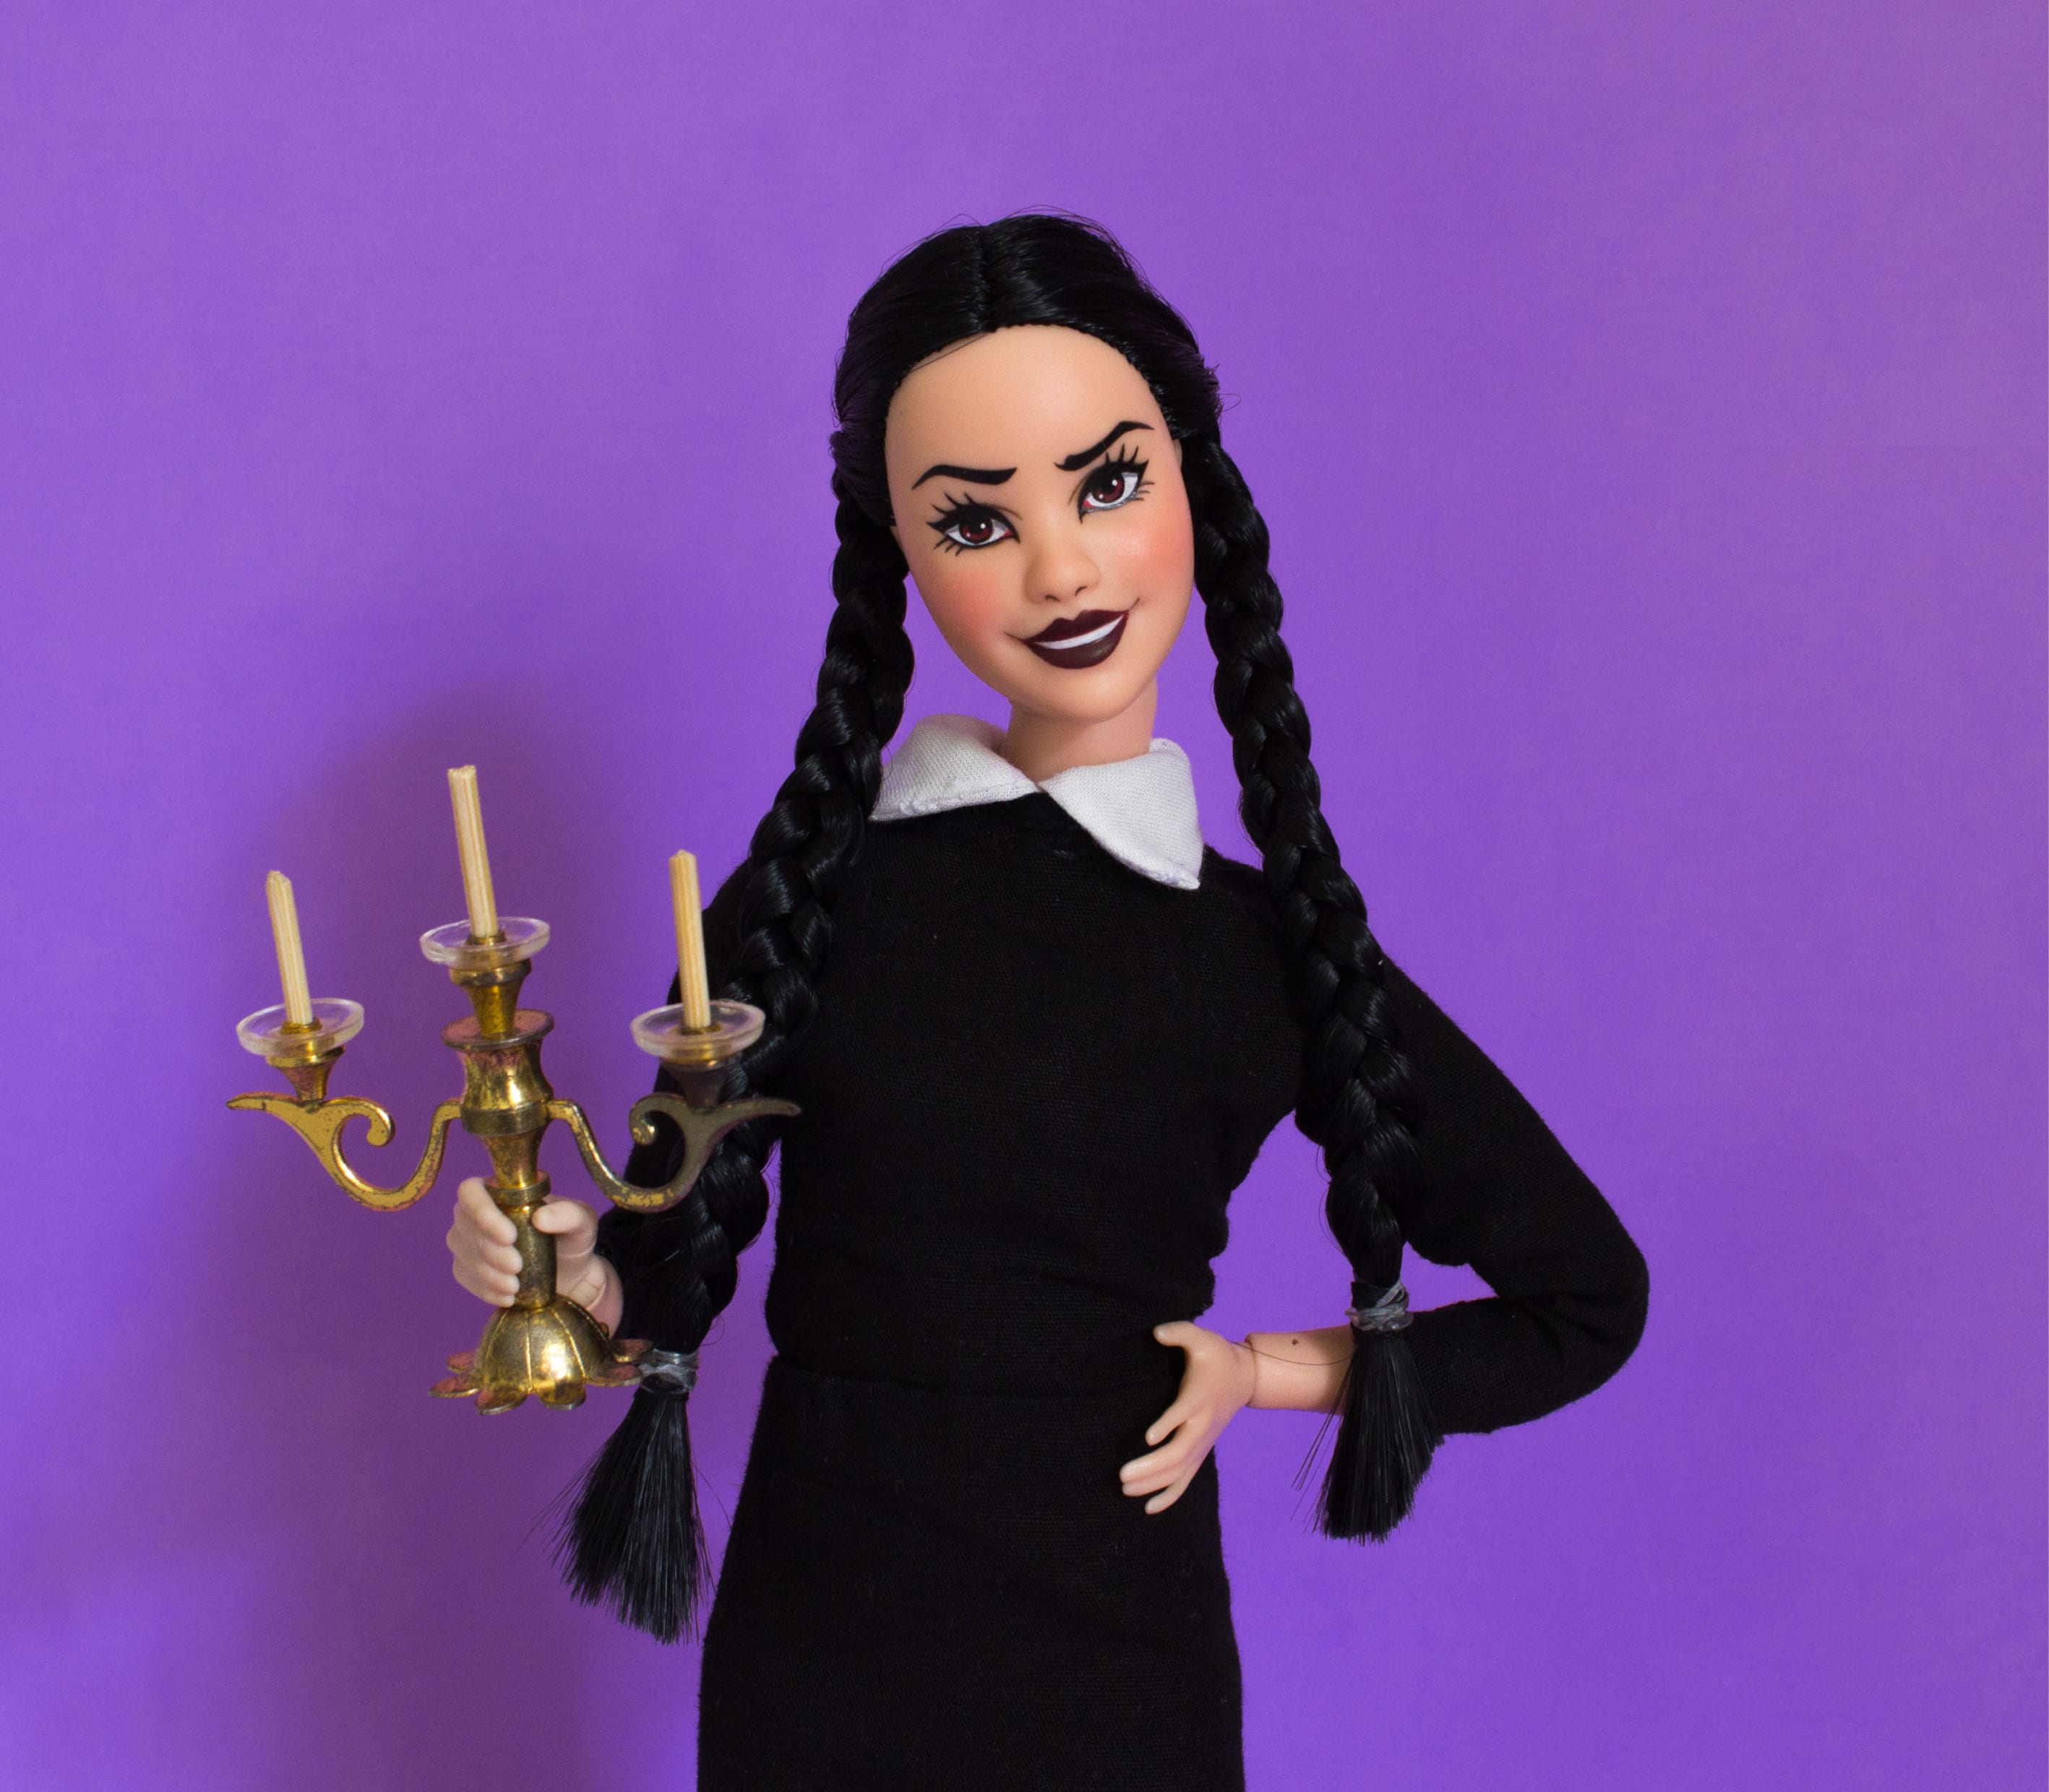 Wednesday Addams Ooak Barbie Puppe mit Petite Made To Move Body - .de